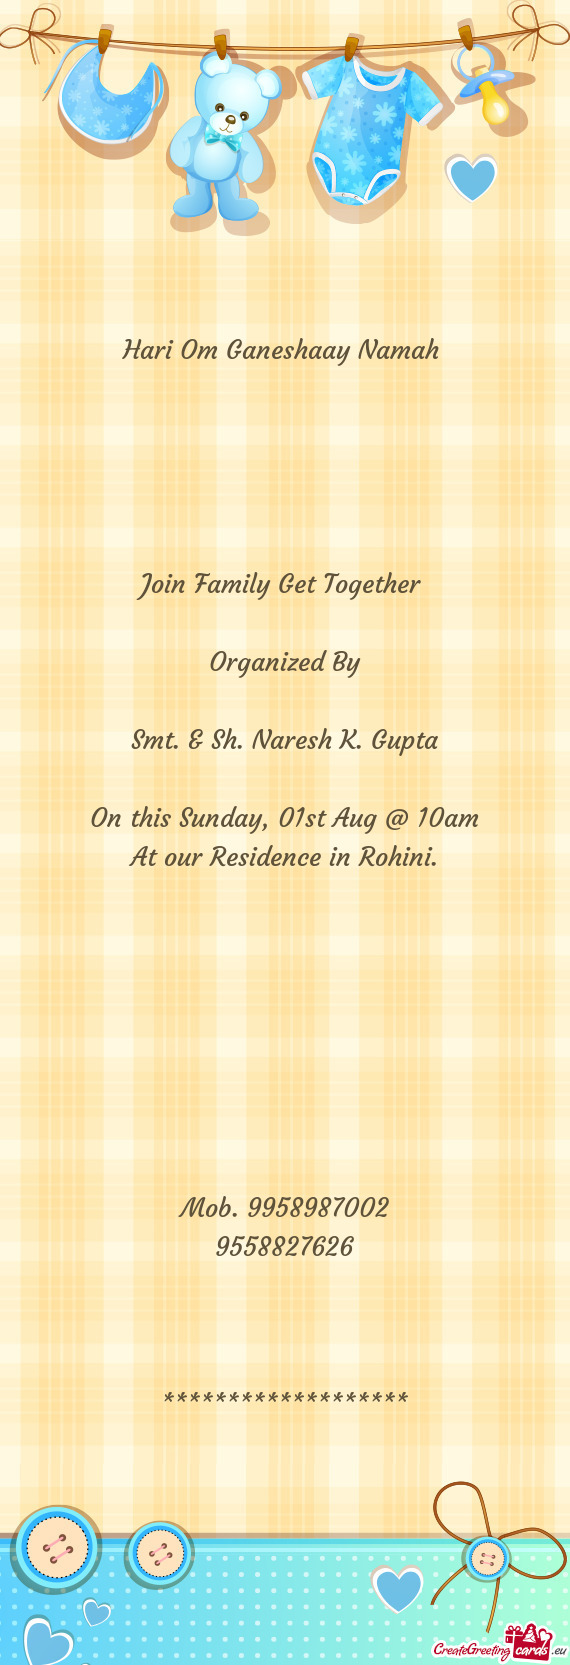 01st Aug @ 10am
 At our Residence in Rohini